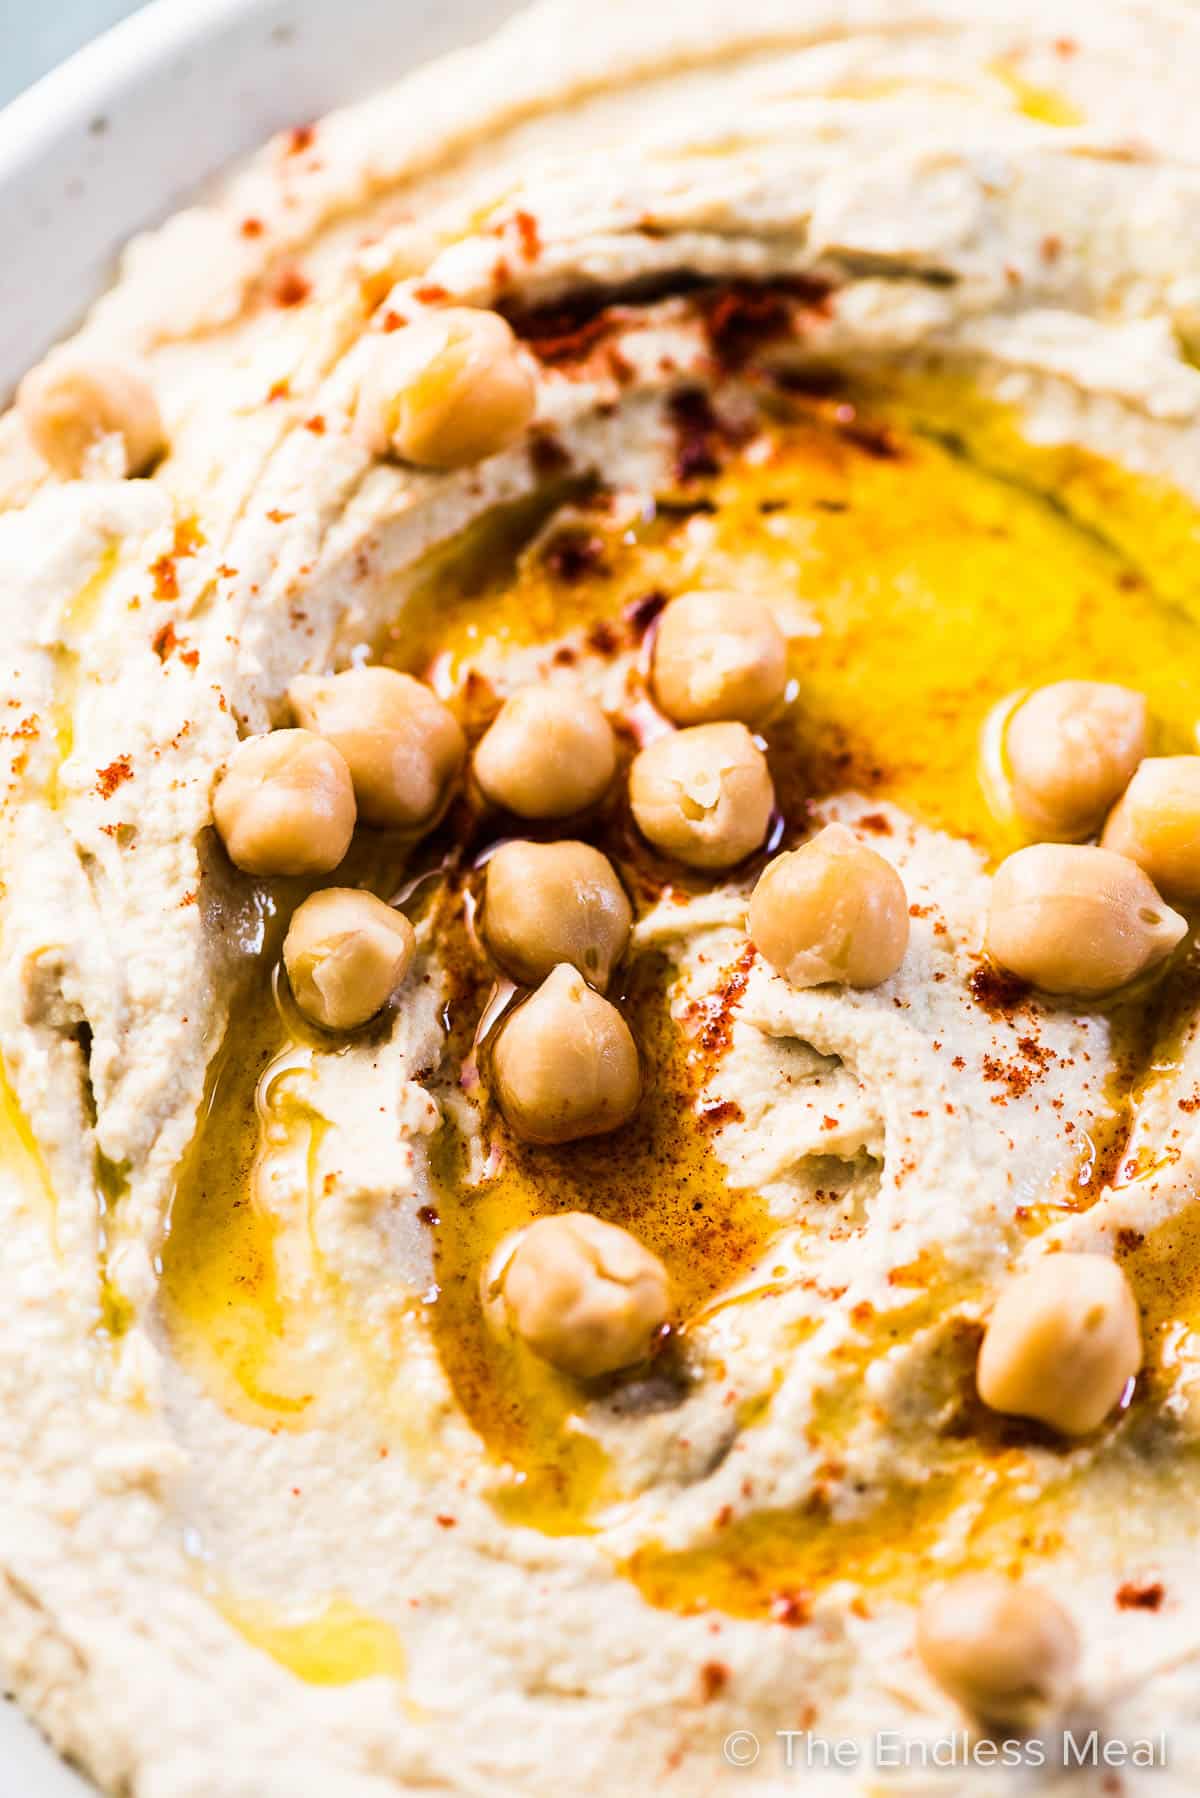 A close up shot of an easy hummus recipe with chickpeas and olive oil on top.